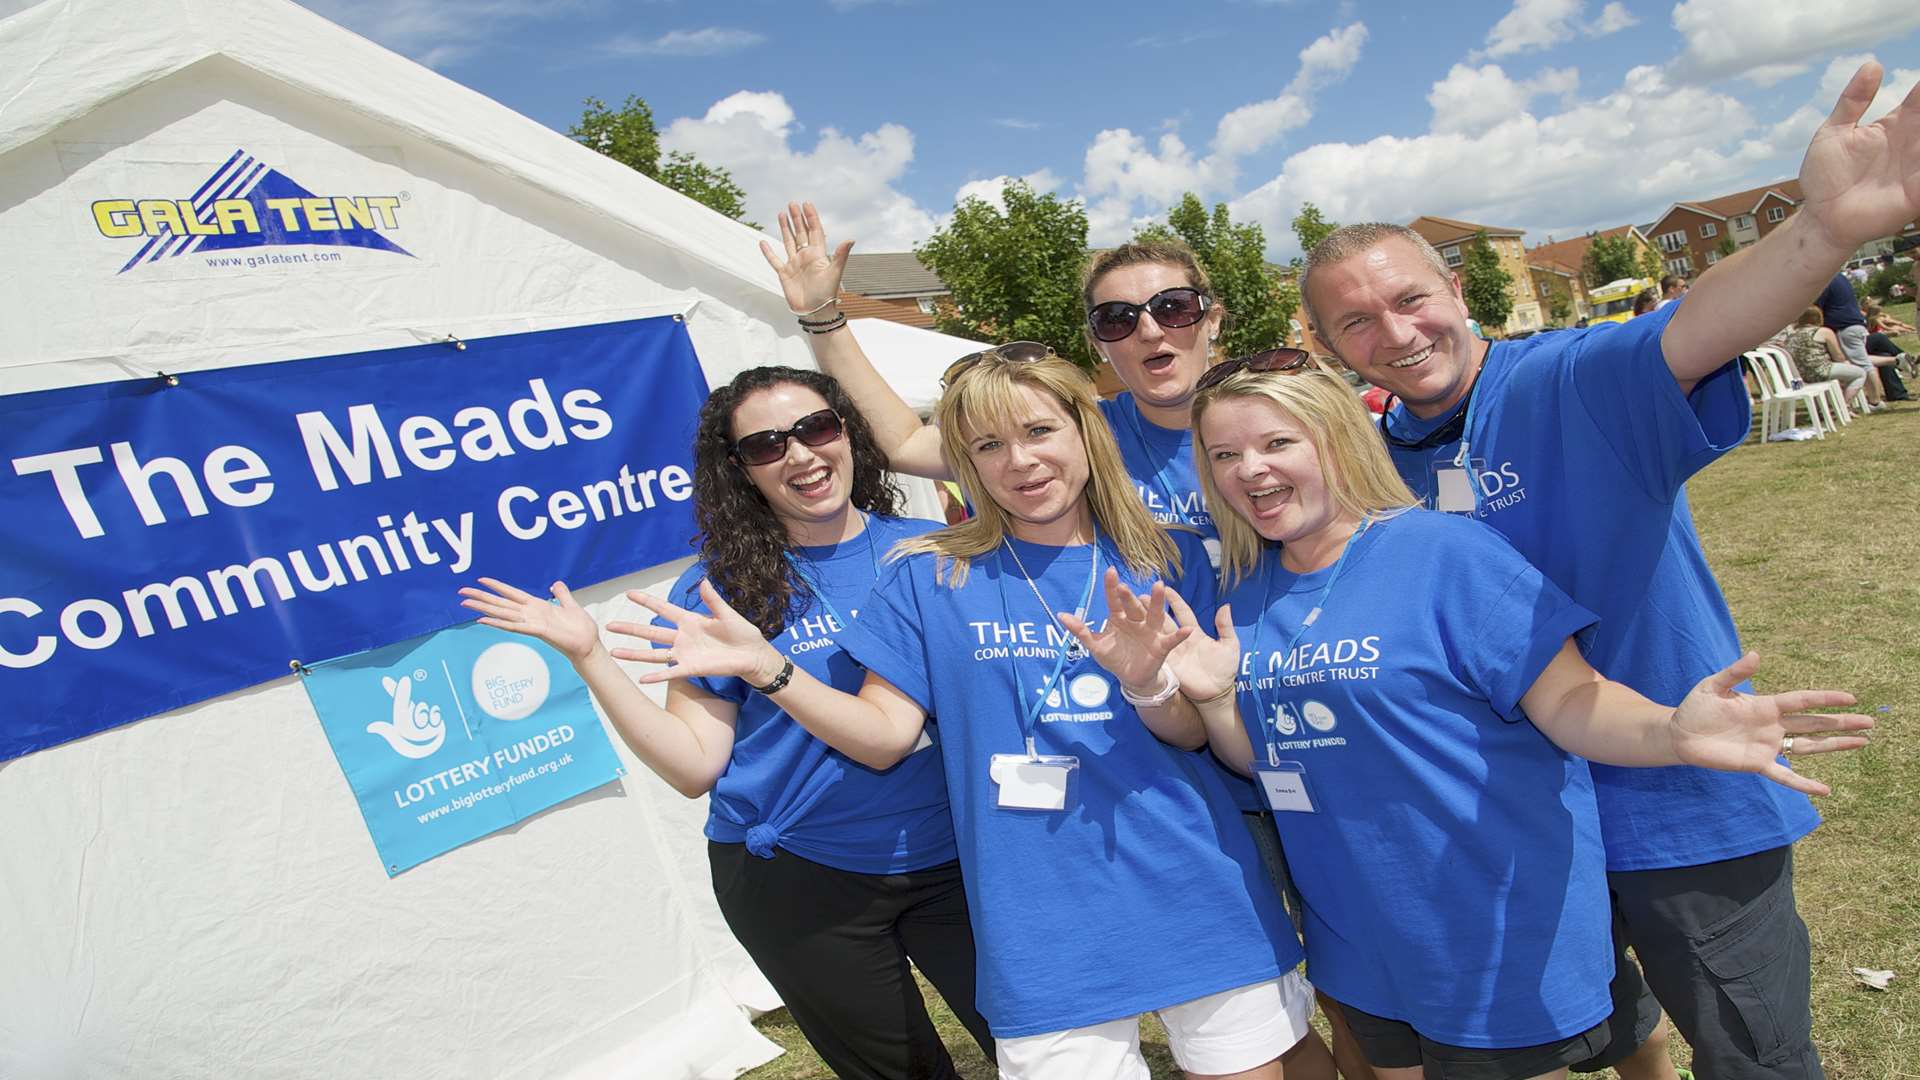 Members of The Meads Community Centre Trust